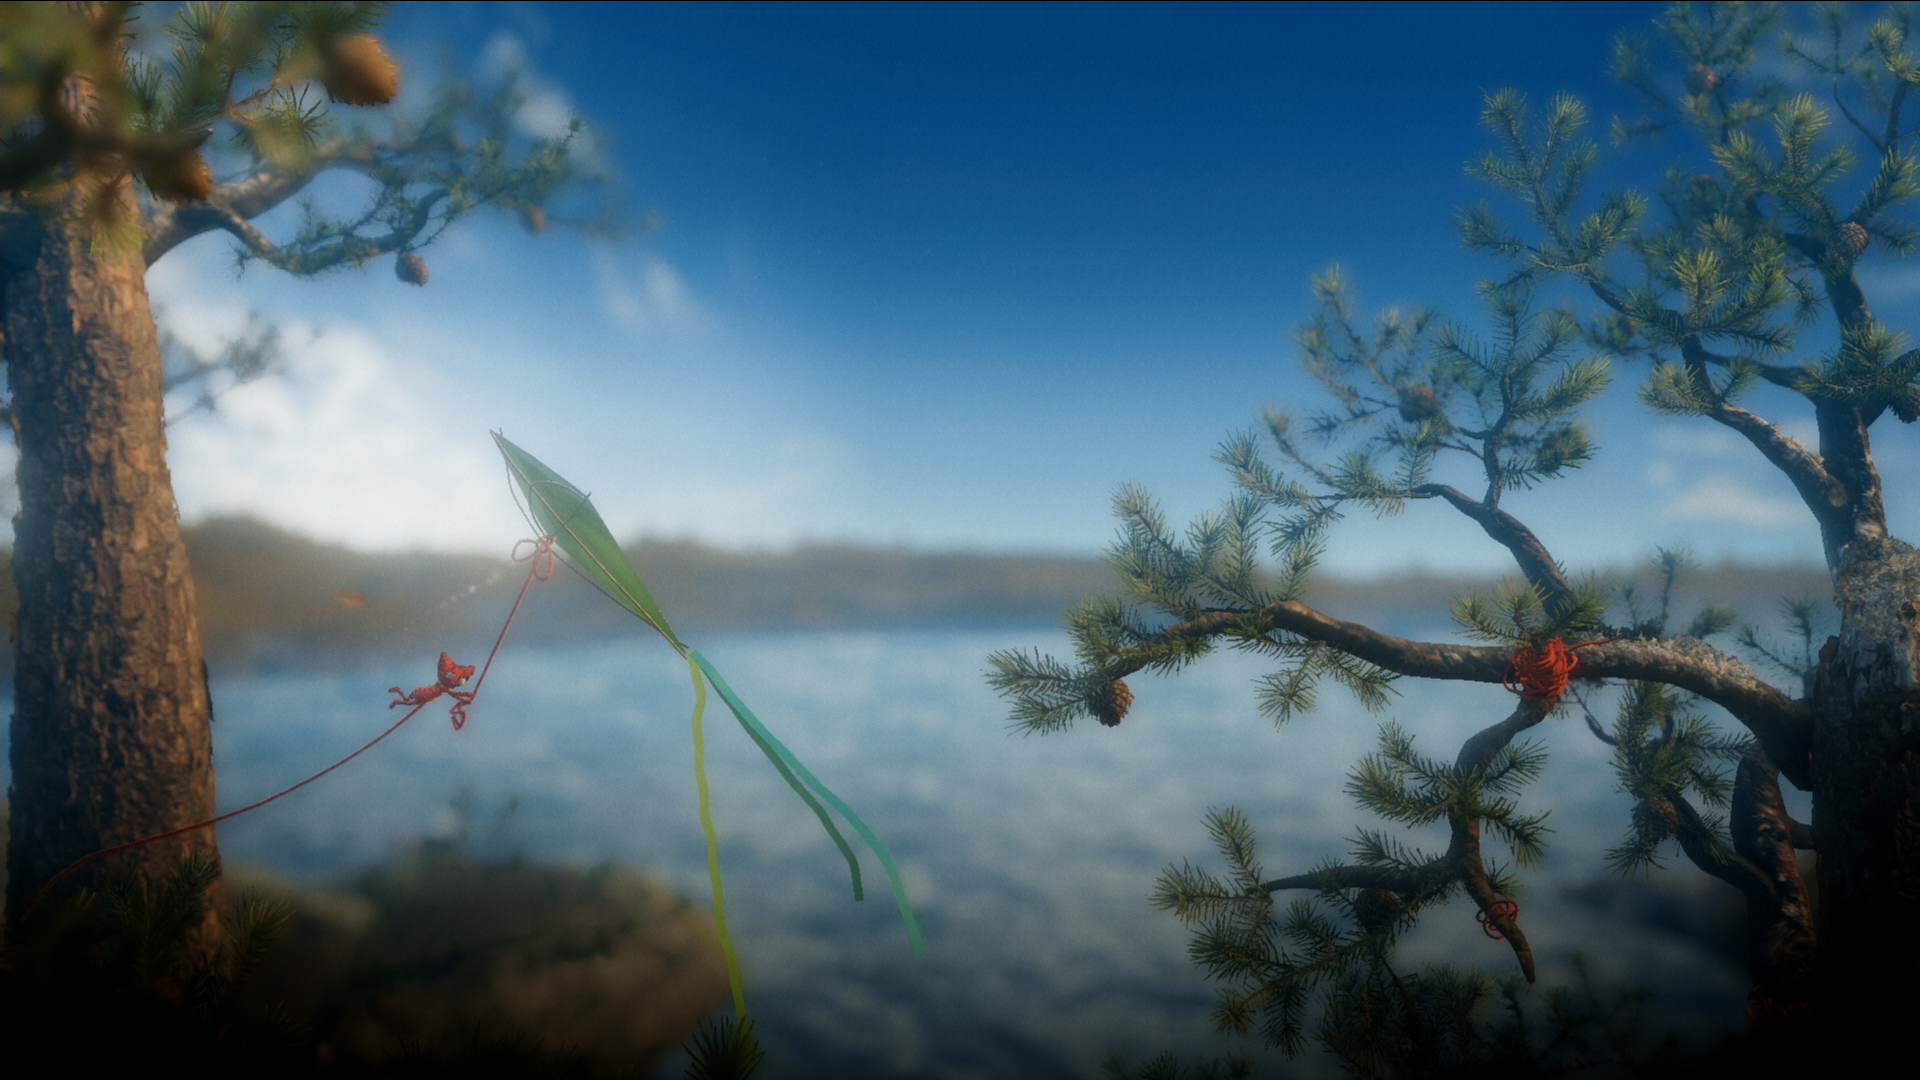 Yarny can make creative use of objects in order to make progress. Image courtesy of Electronic Arts.